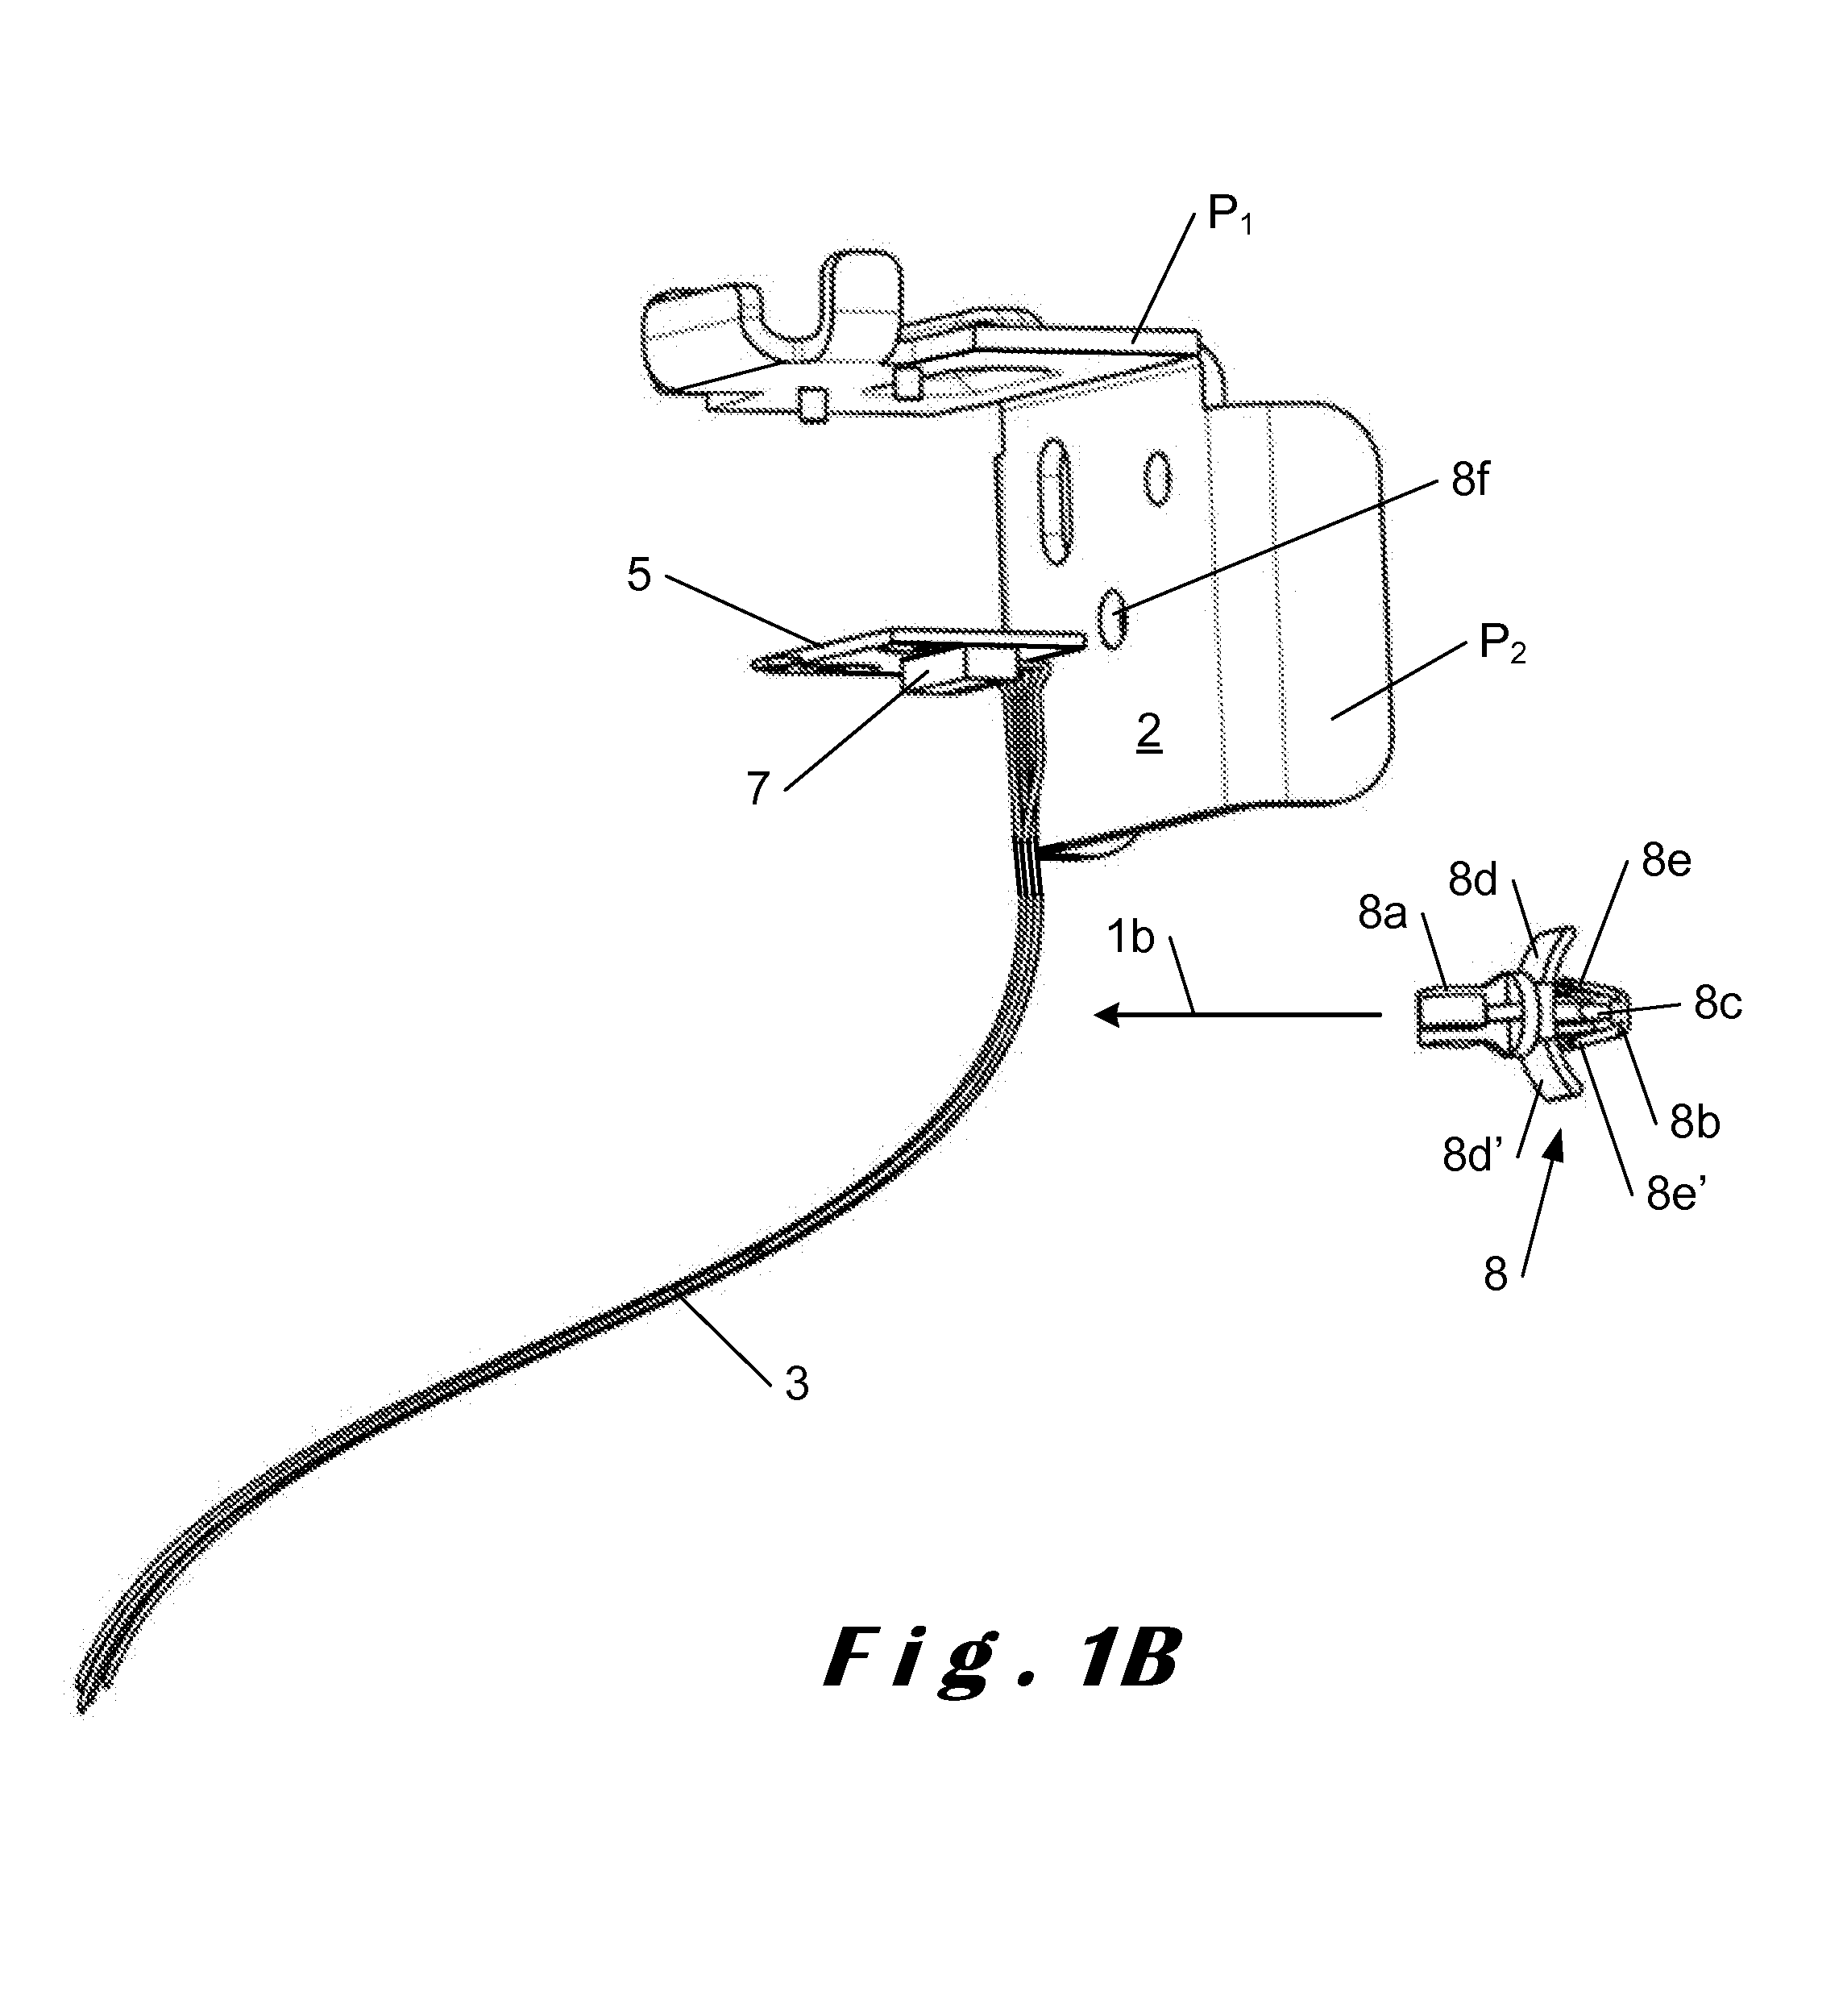 Semiconductor-component device assembled on a heat sink, assembly method, and lighting device for a motor vehicle including such a device